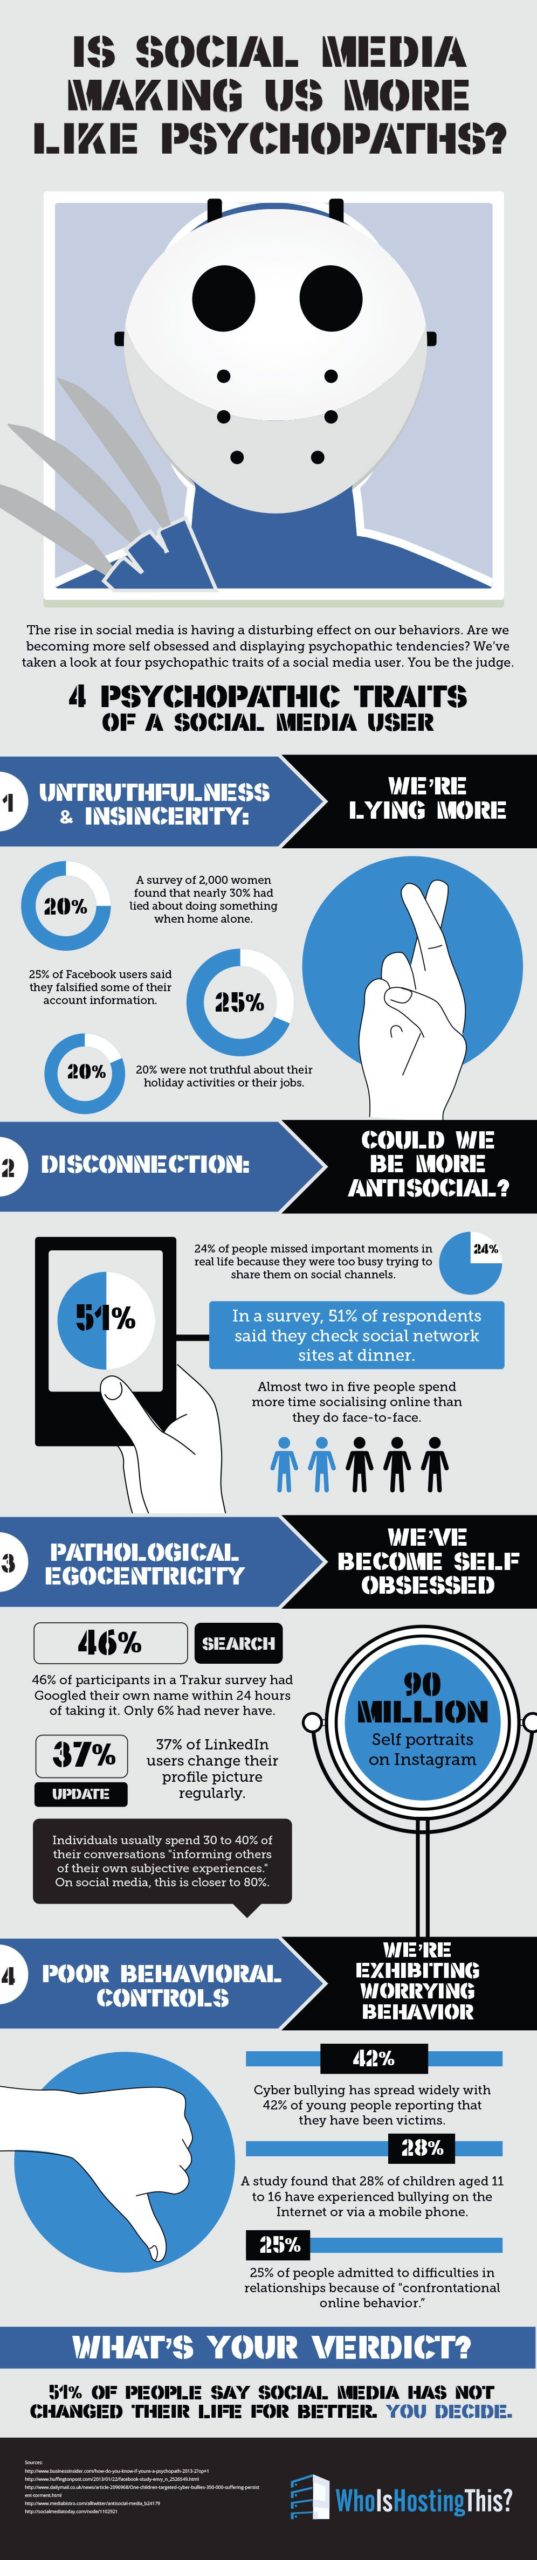 Infografia - How Social Media Addicts Are Similar To Psychopaths [Infographic]